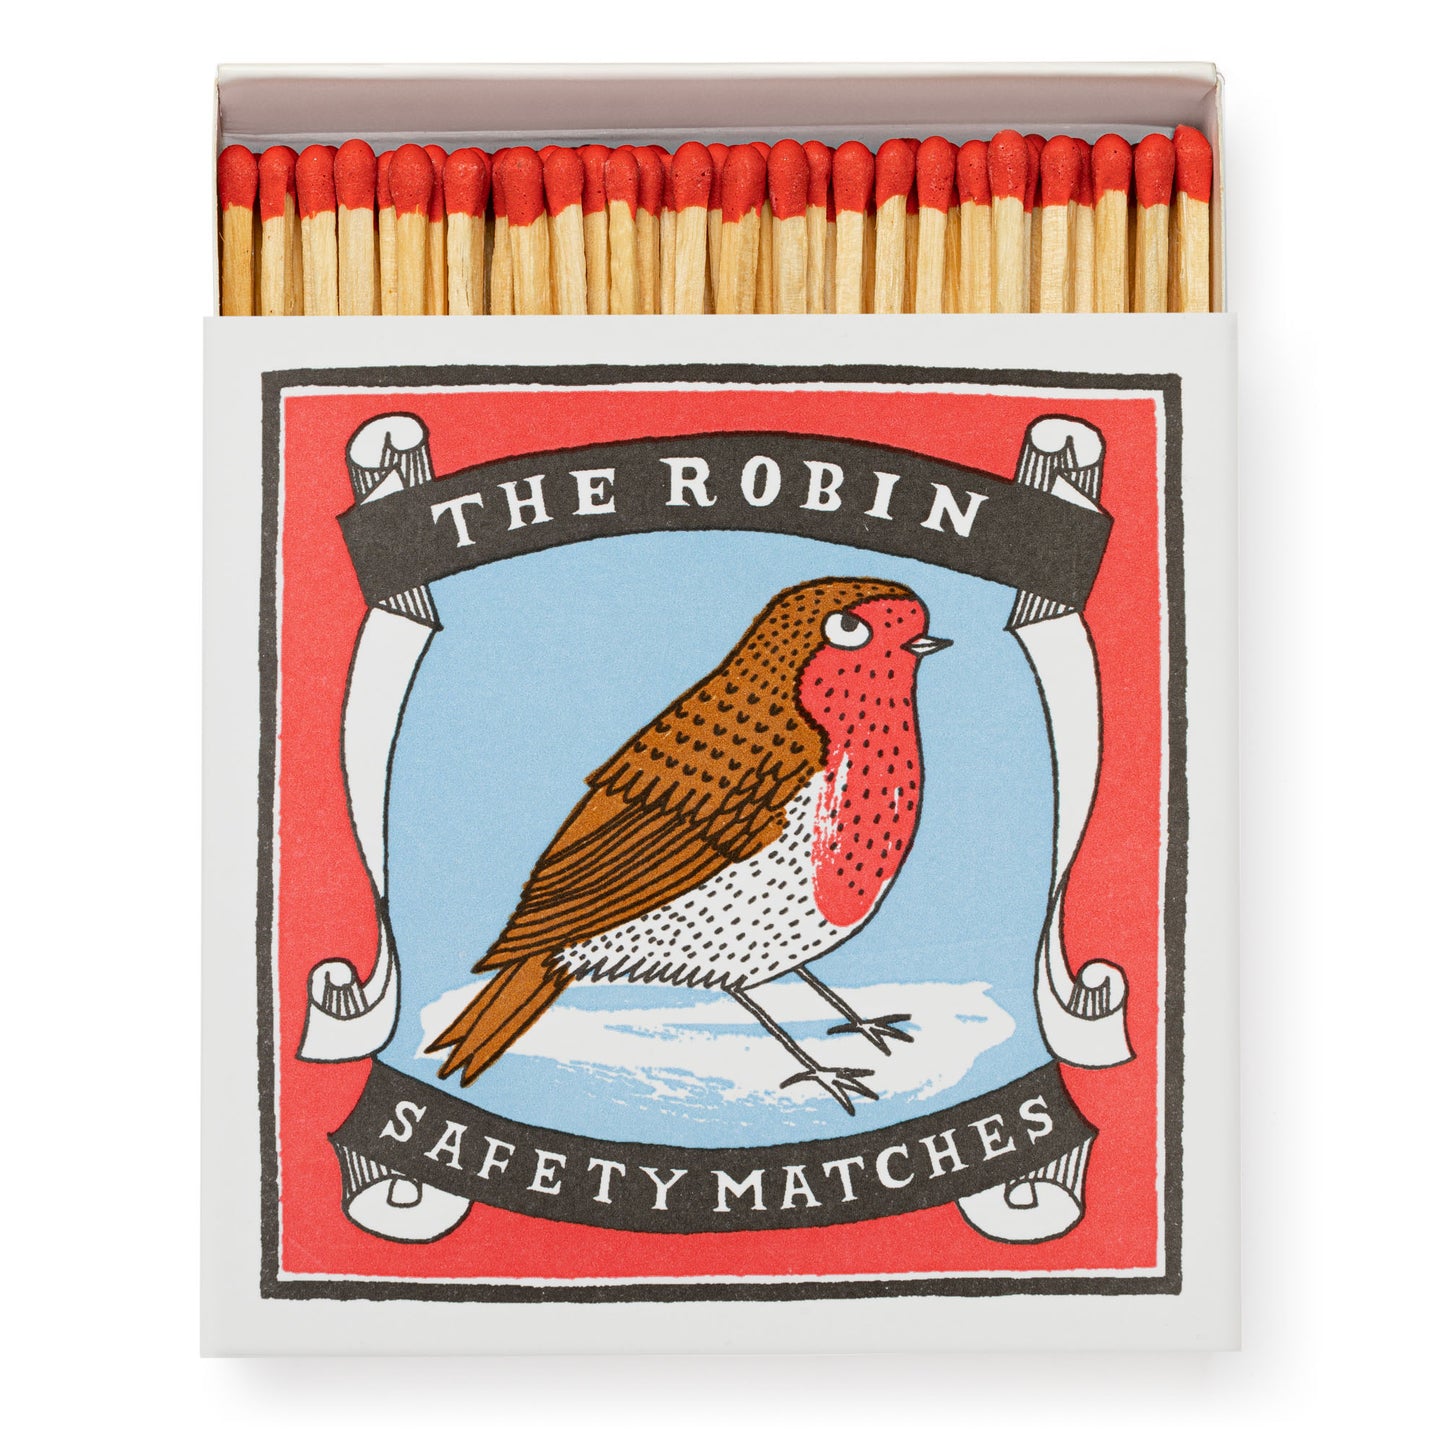 The Robin - Square Box Of Luxury Matches